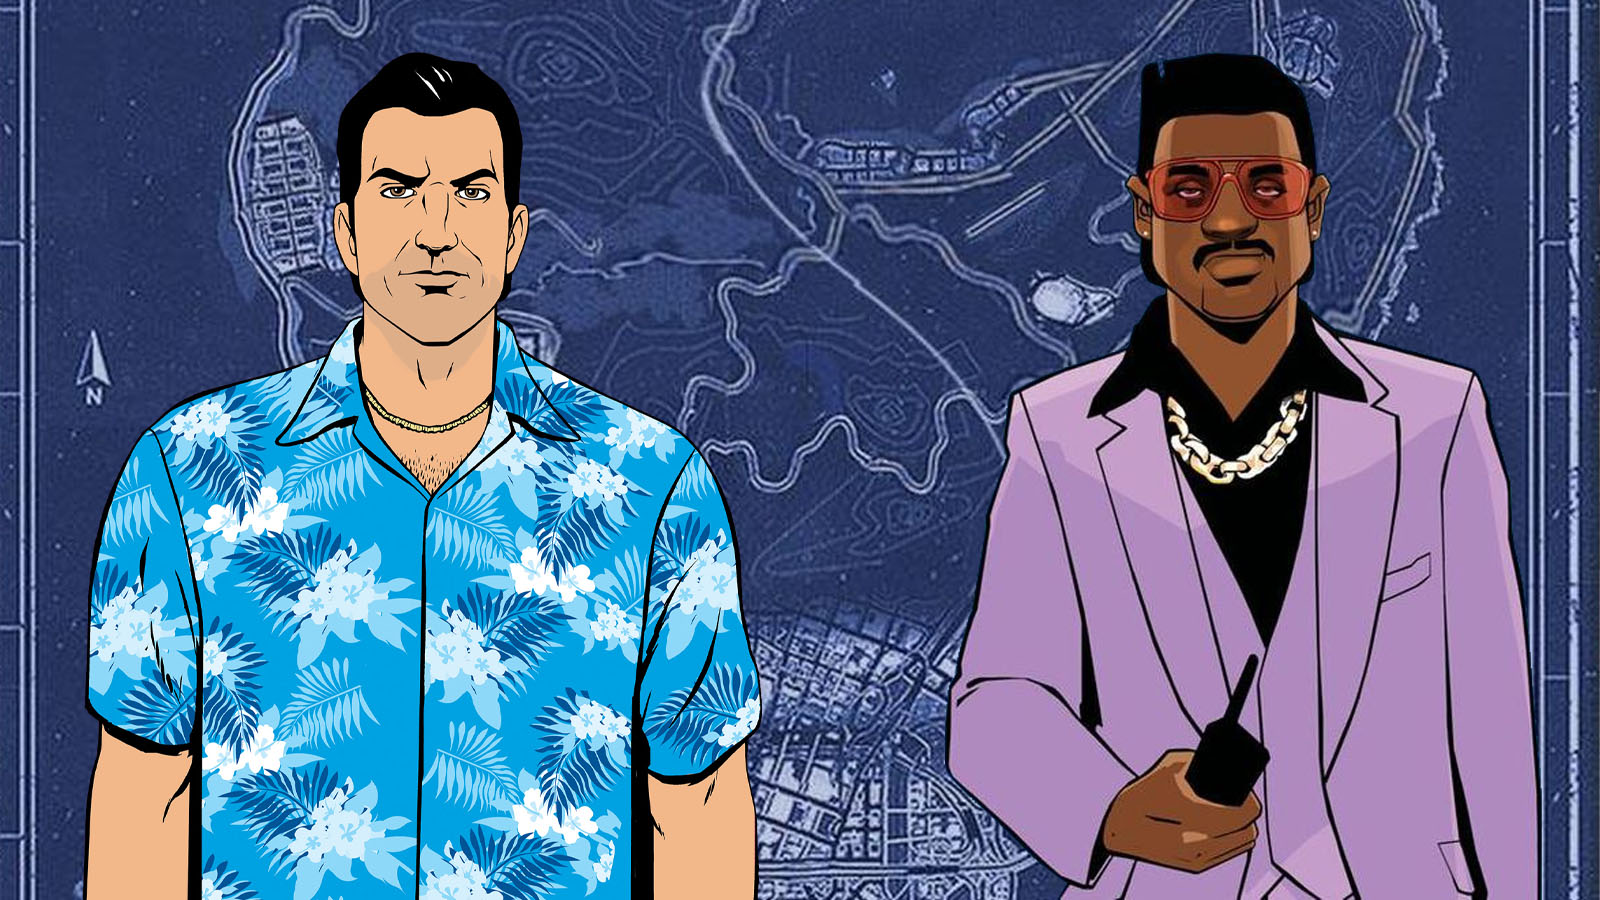 New Evidence Suggests Leaked GTA 6 Map Could Be The Real Deal